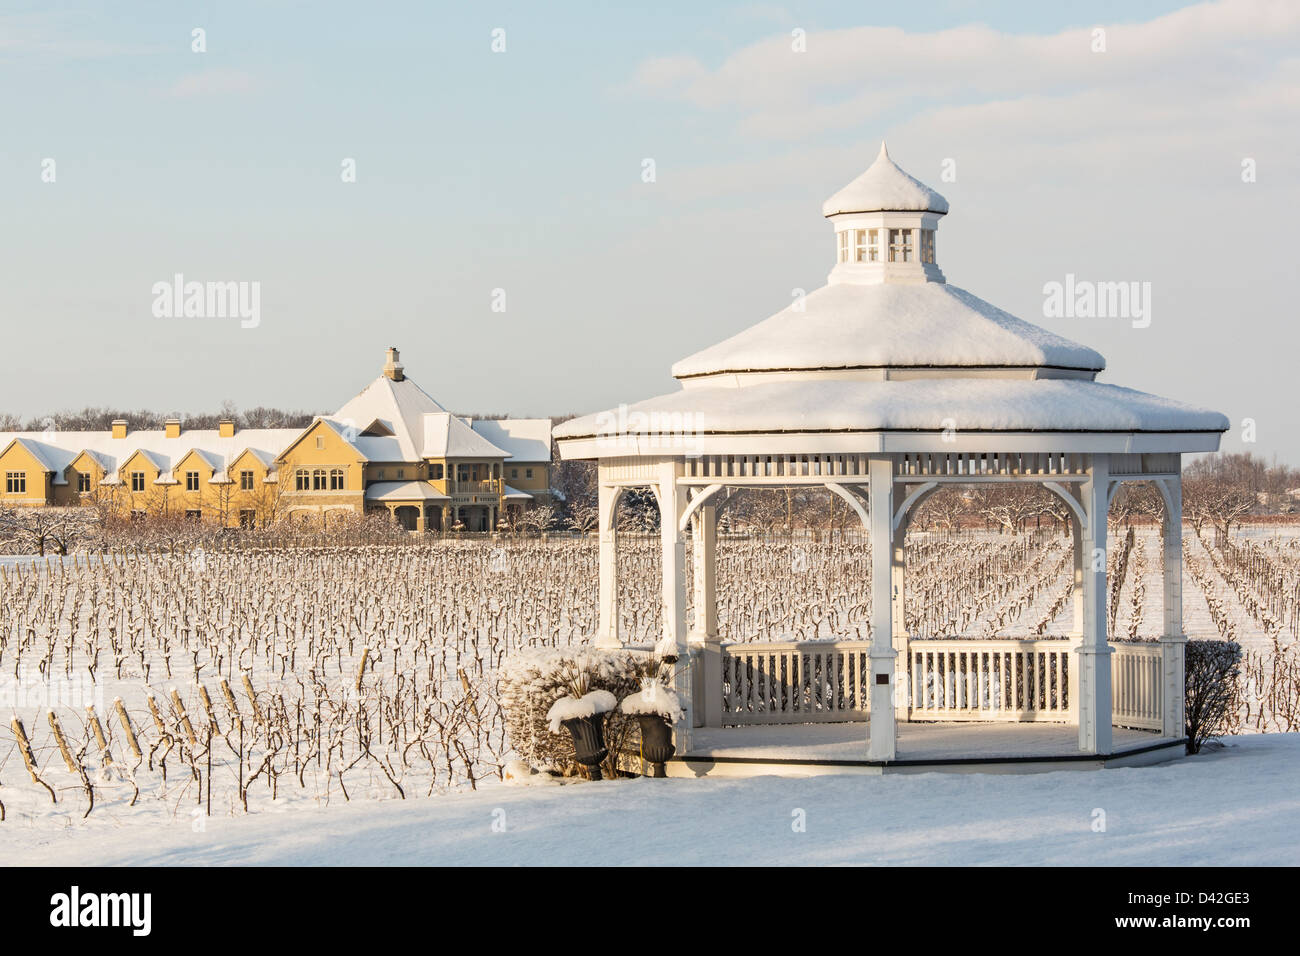 Canada,Ontario,Niagara-on-the-Lake Ontario, Peller Estate Winery in winter with a gazebo in the foreground Stock Photo